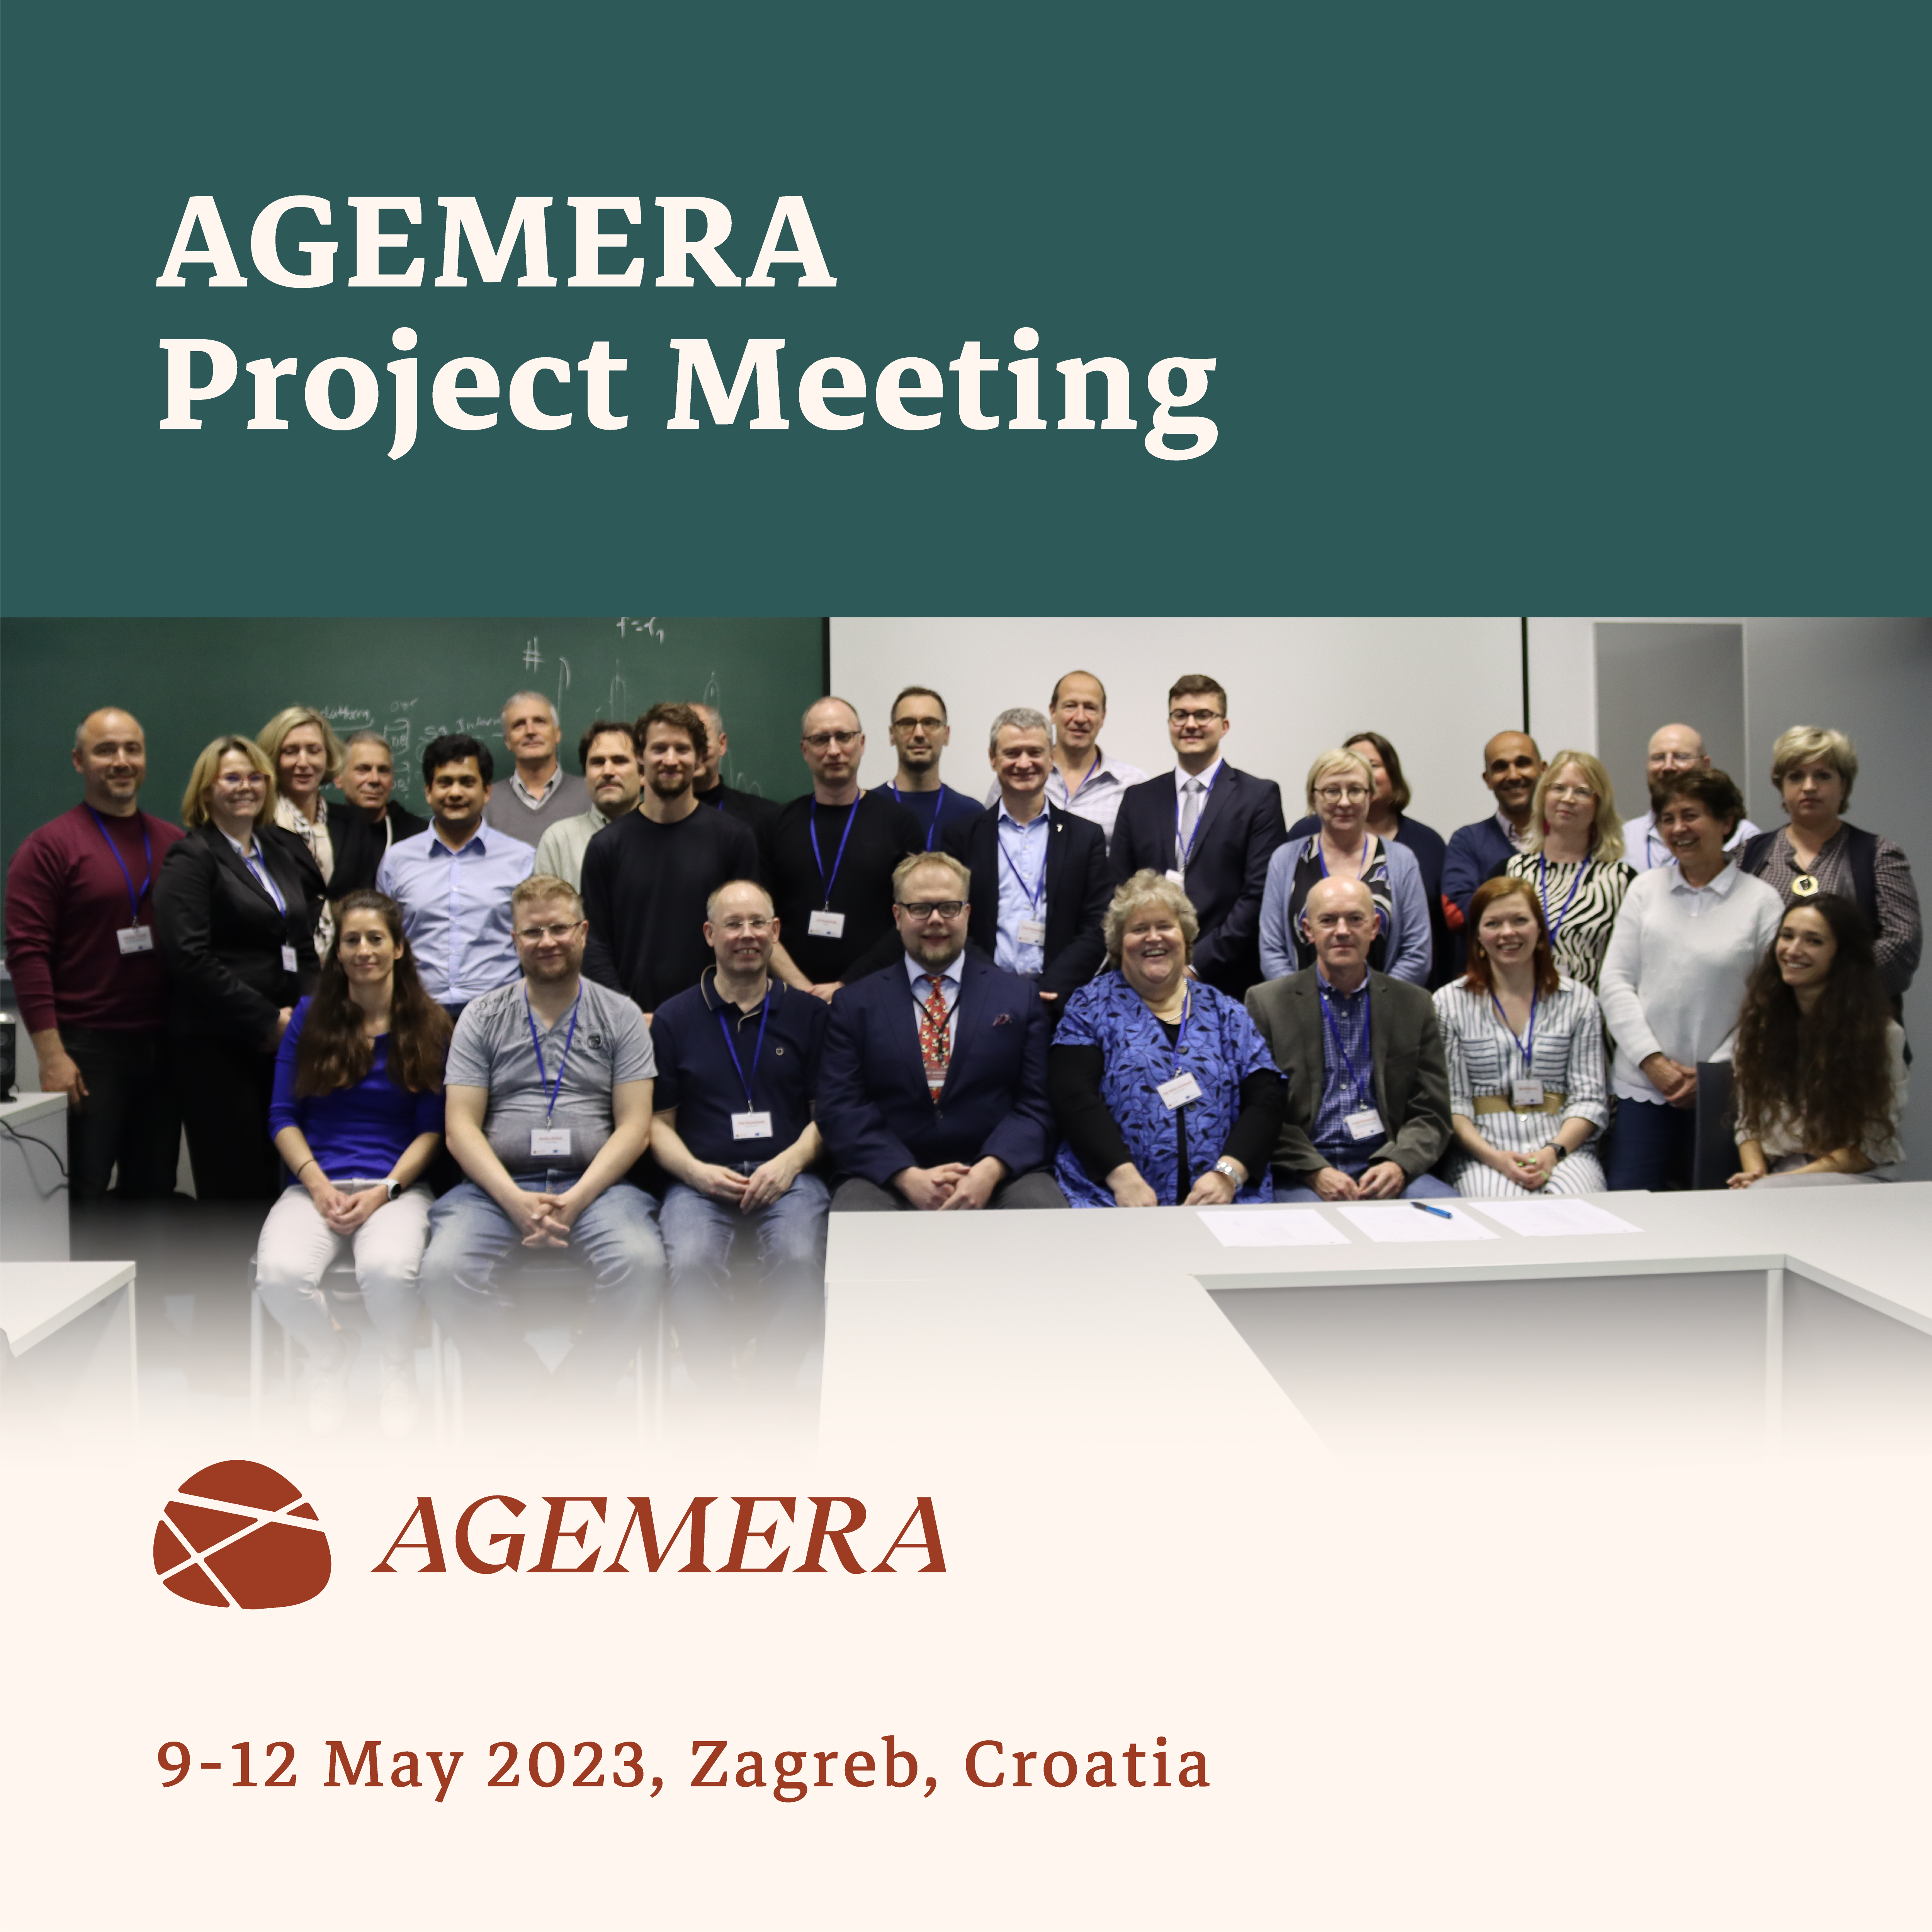 AGEMERA team reunites in Zagreb for its second General Assembly meeting